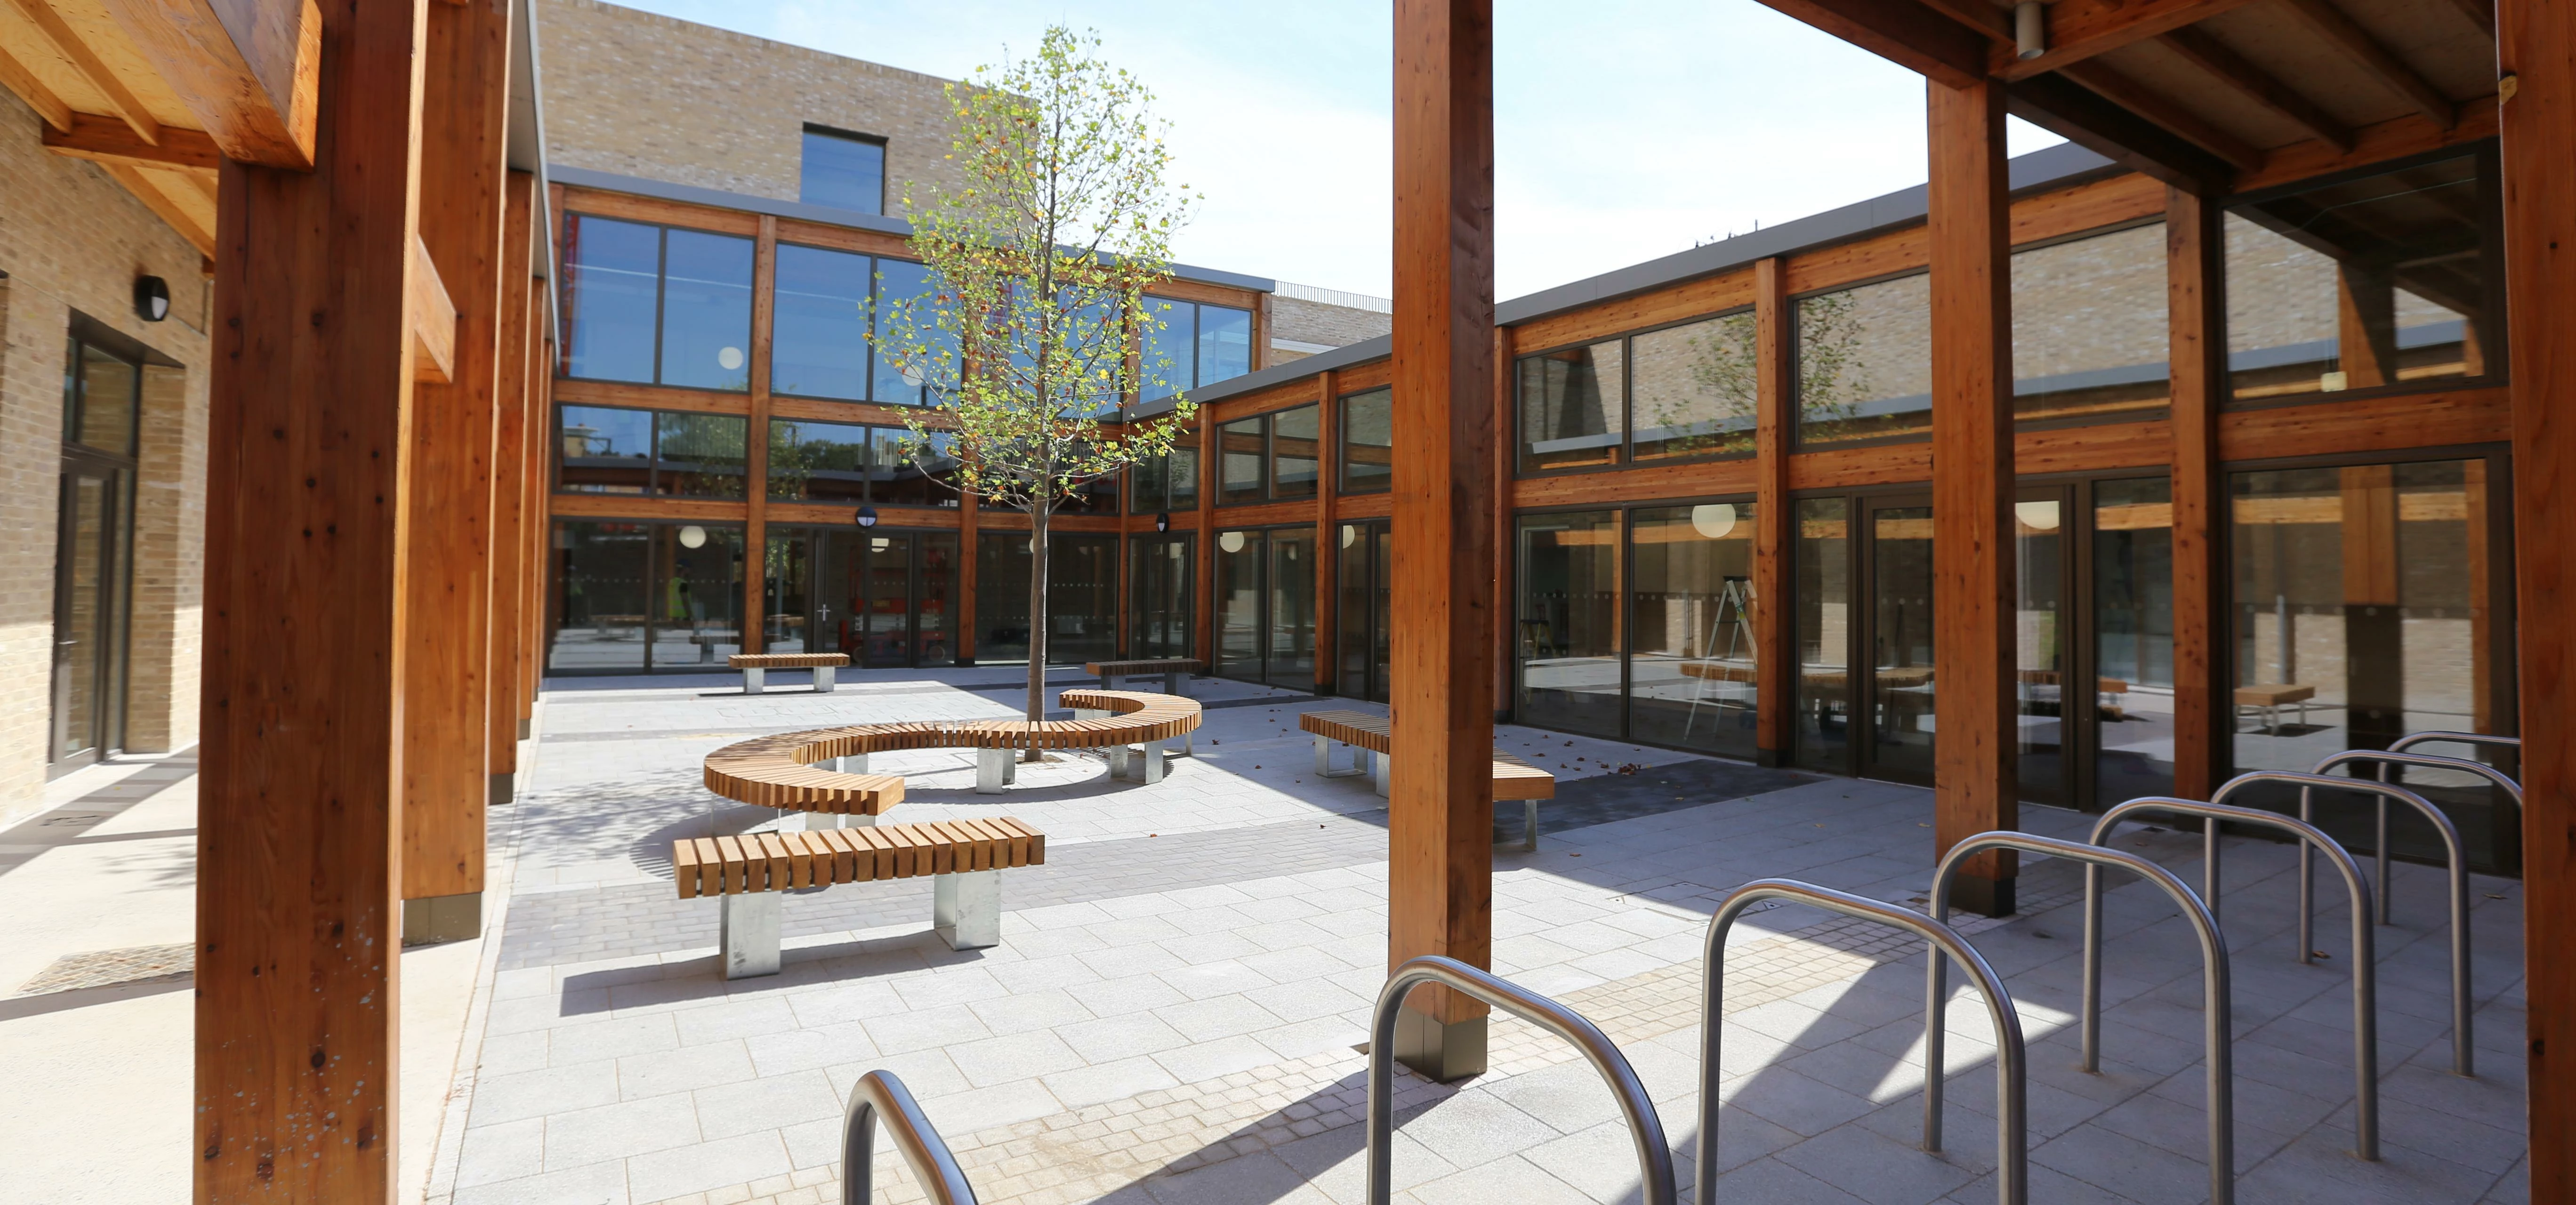 The central courtyard at Hawley Primary School.